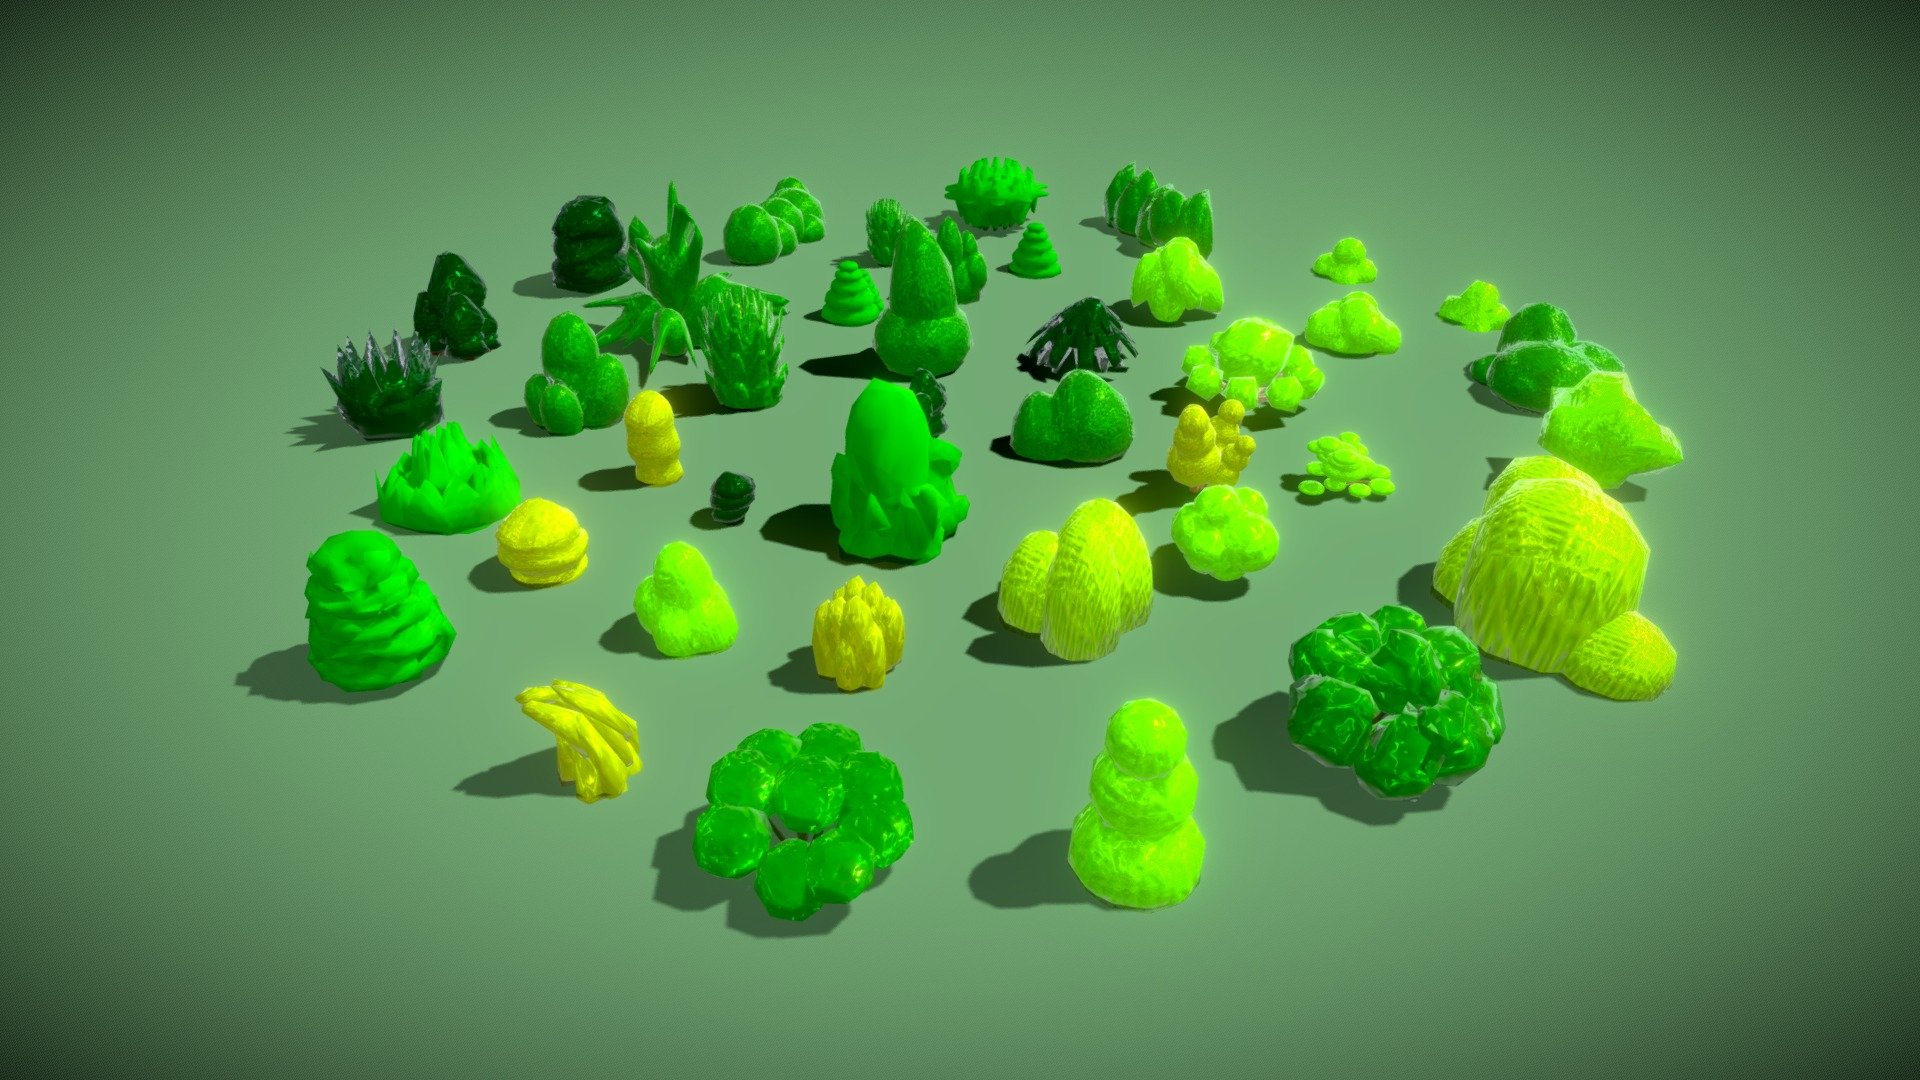 Cartoon style bushes made using Blender 2.79 and the cycles render engine.

Check out my blog at: https://rhcreations.tumblr.com/ - Cartoon Bushes - Download Free 3D model by rhcreations 3d model